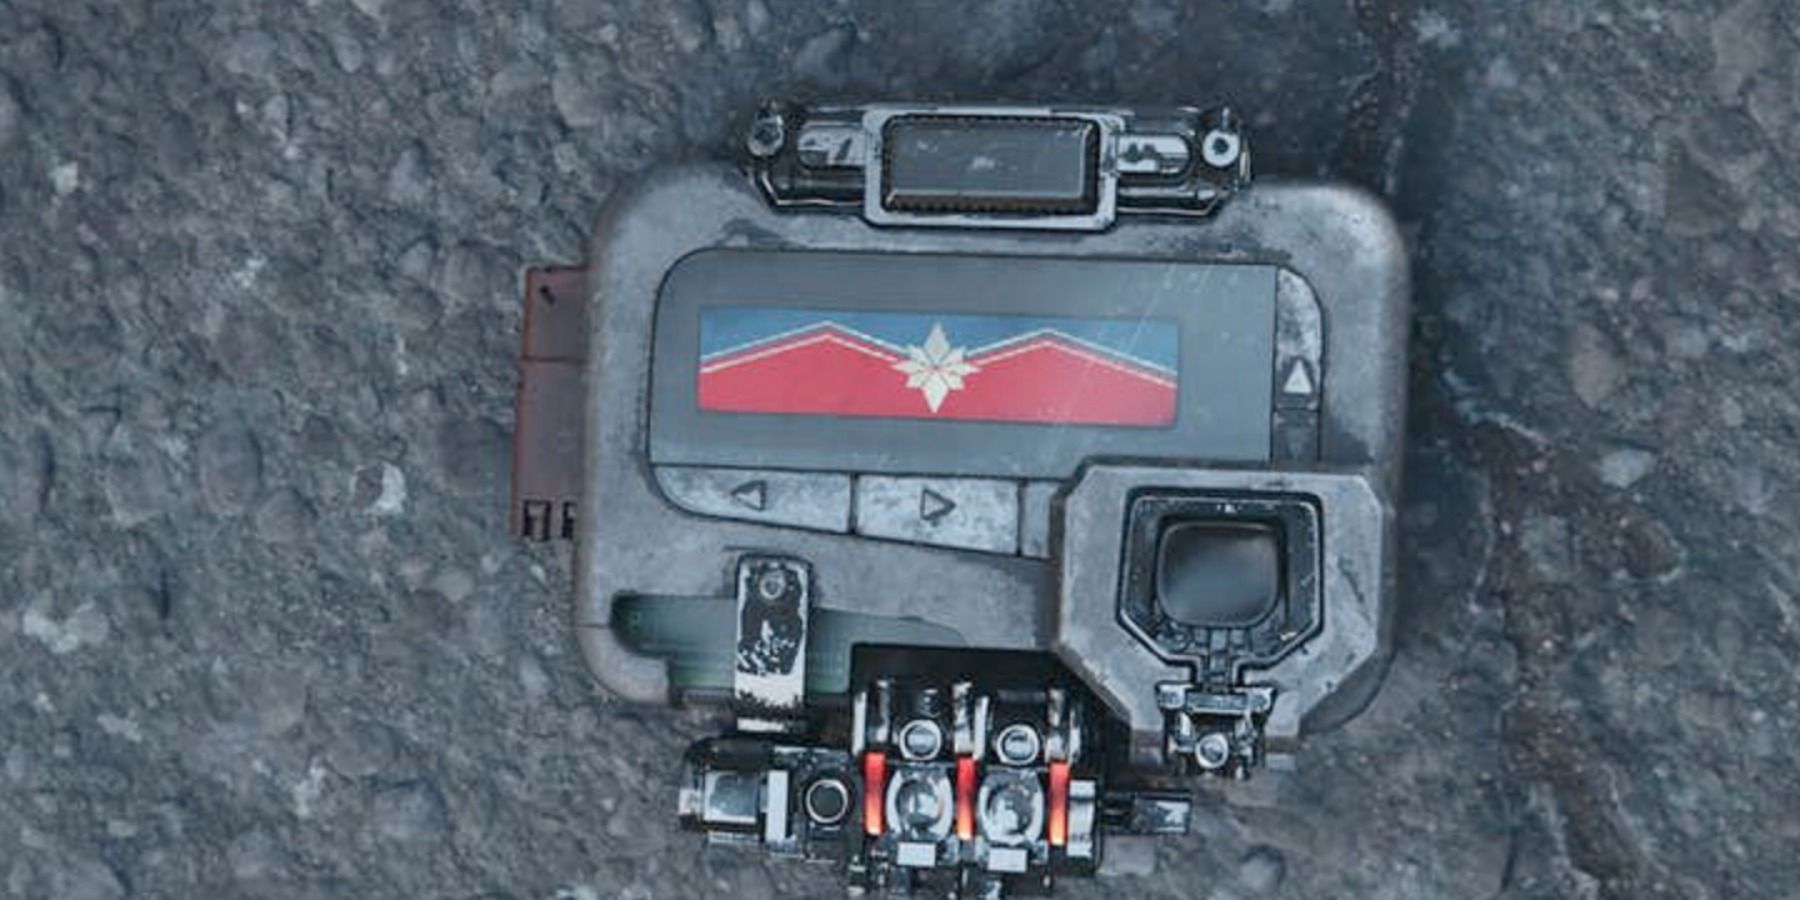 Captain Marvel's beeper on the ground in Avengers: Infinity War